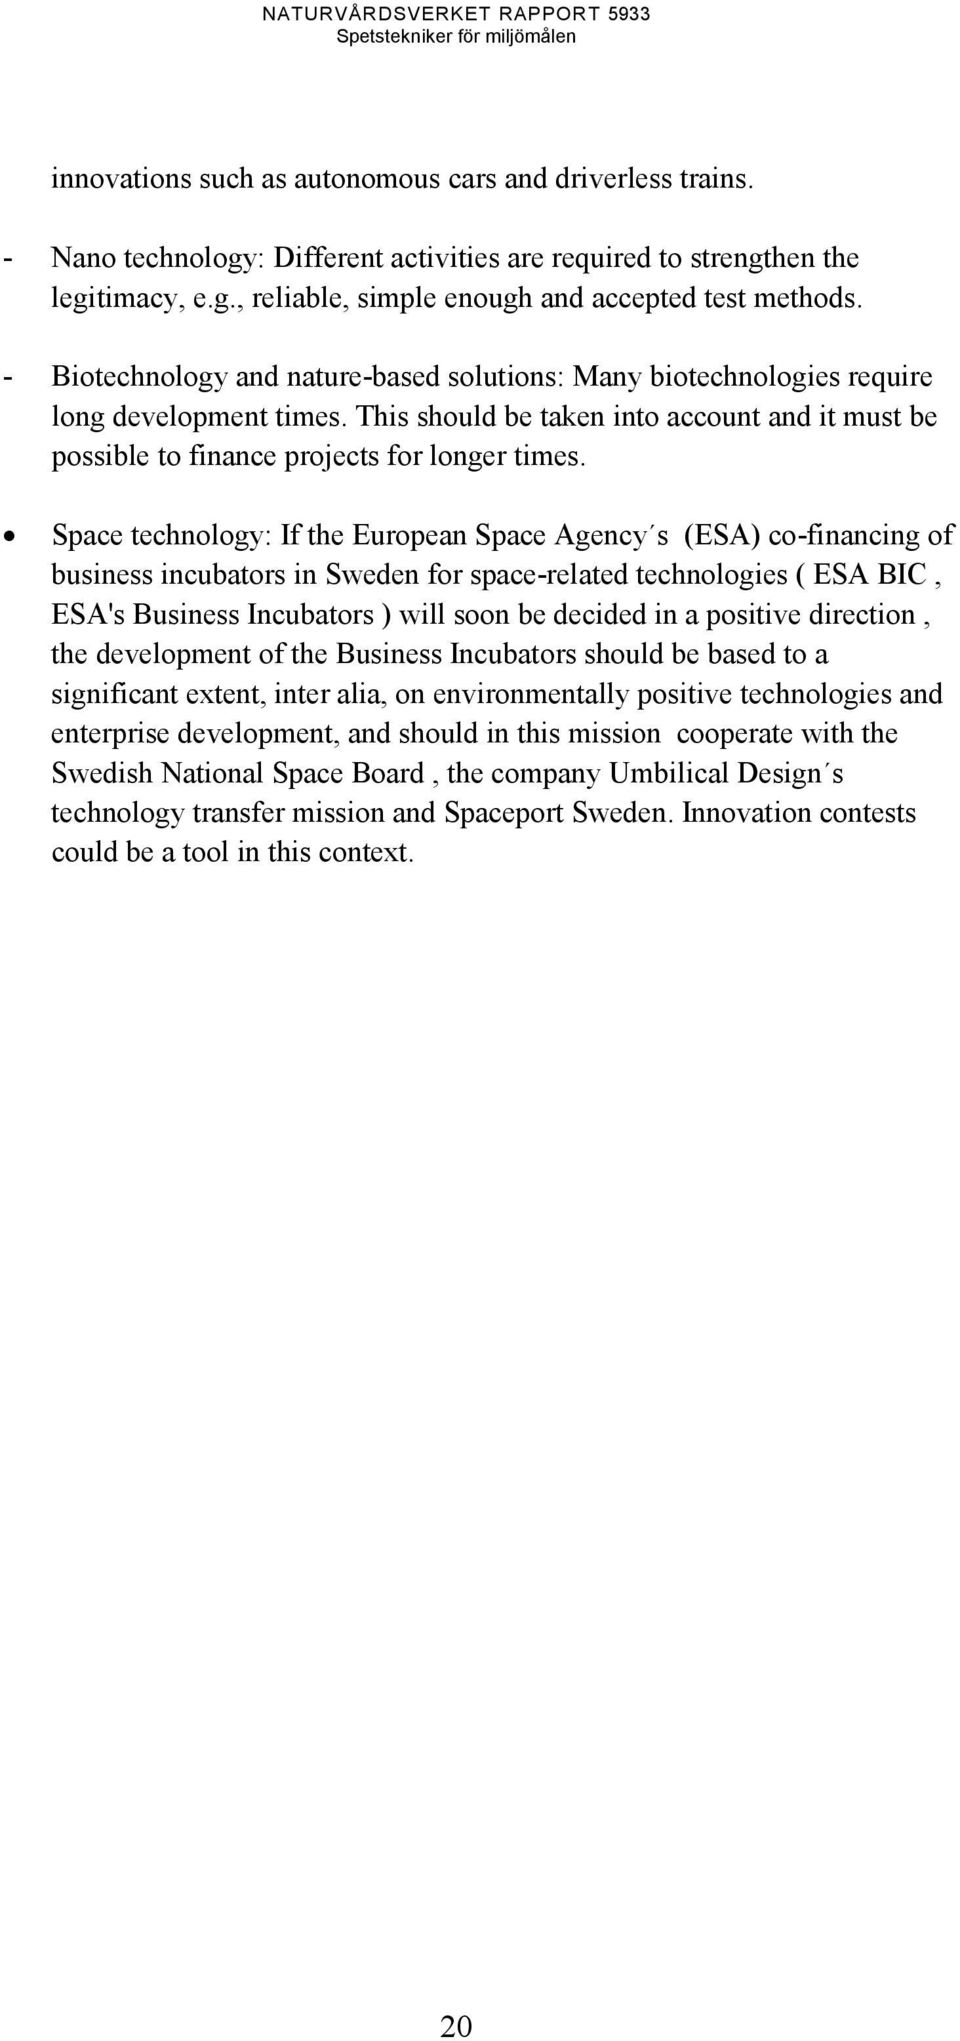 Space technology: If the European Space Agency s (ESA) co-financing of business incubators in Sweden for space-related technologies ( ESA BIC, ESA's Business Incubators ) will soon be decided in a